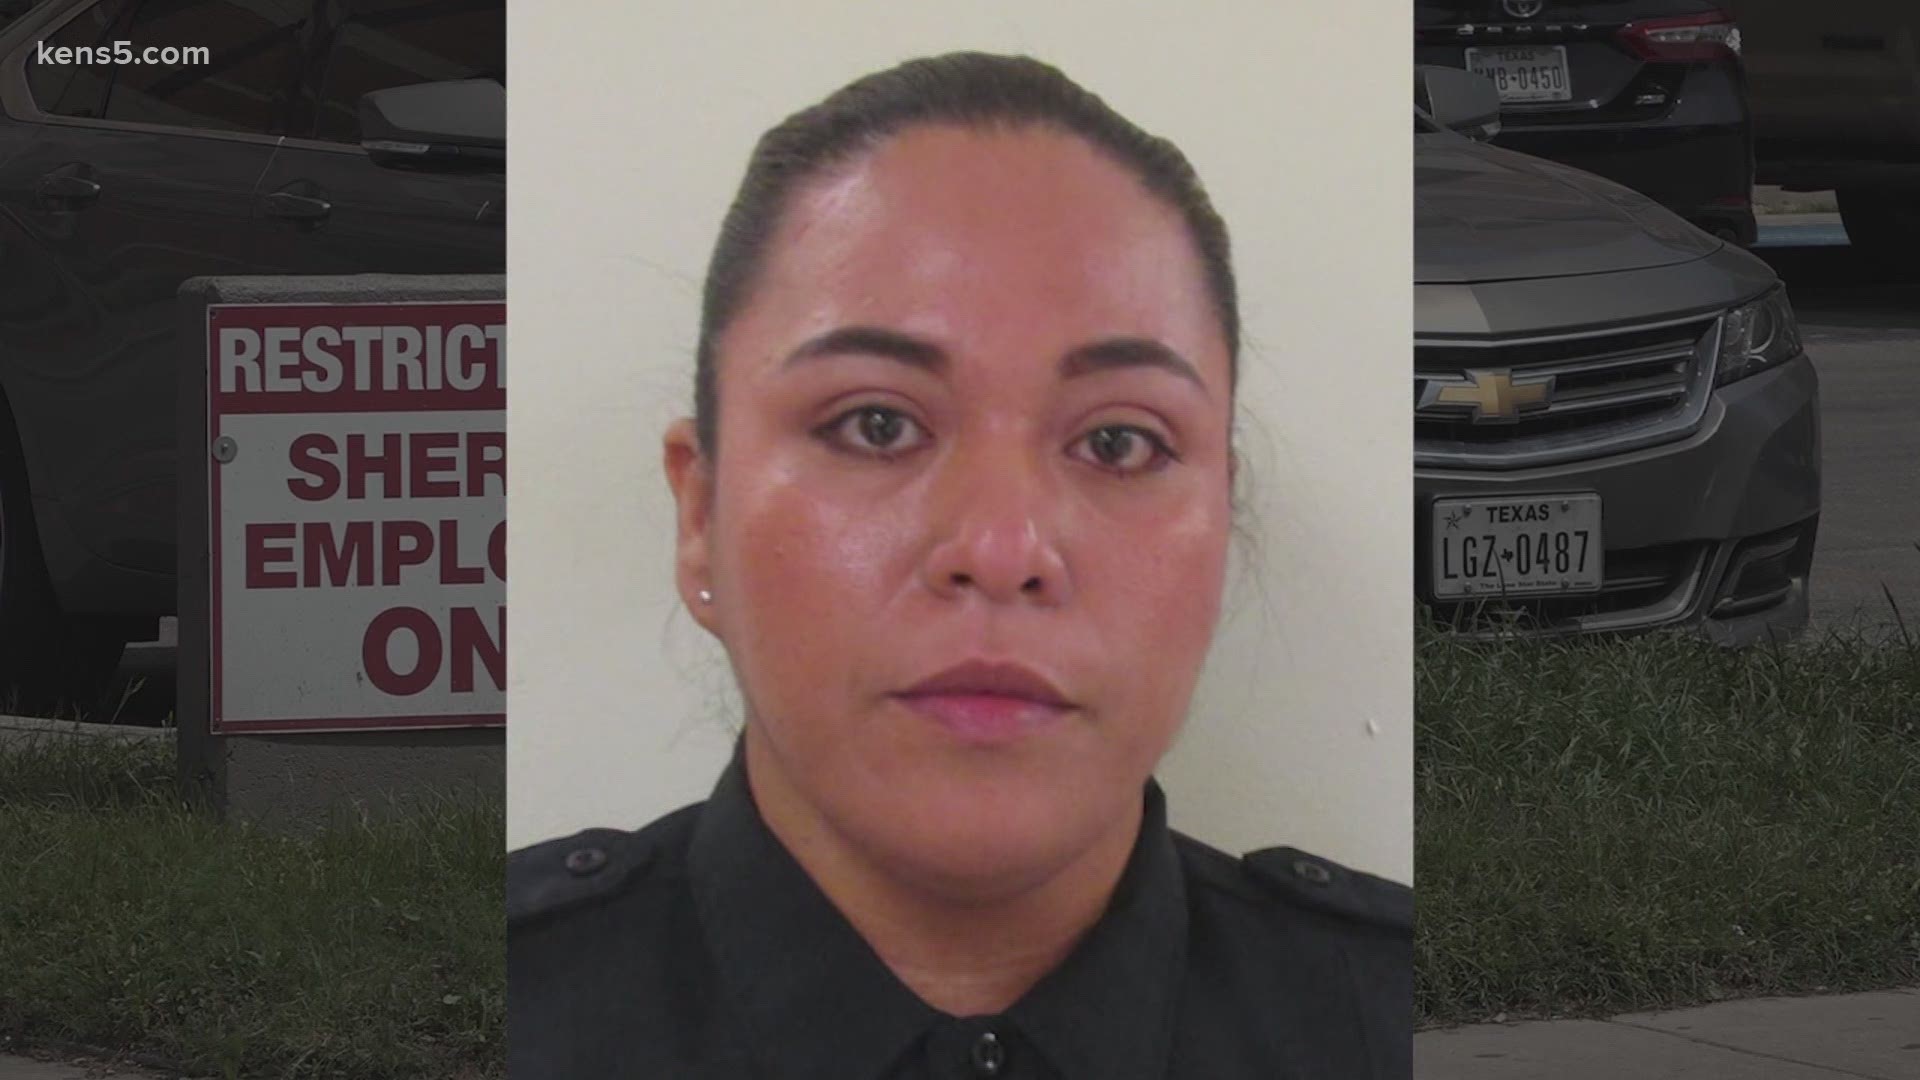 The Deputy Sheriff's Association president said that Simona Barron had worked a 16-hour shift, had a day off the next day, and "didn't do anything wrong."